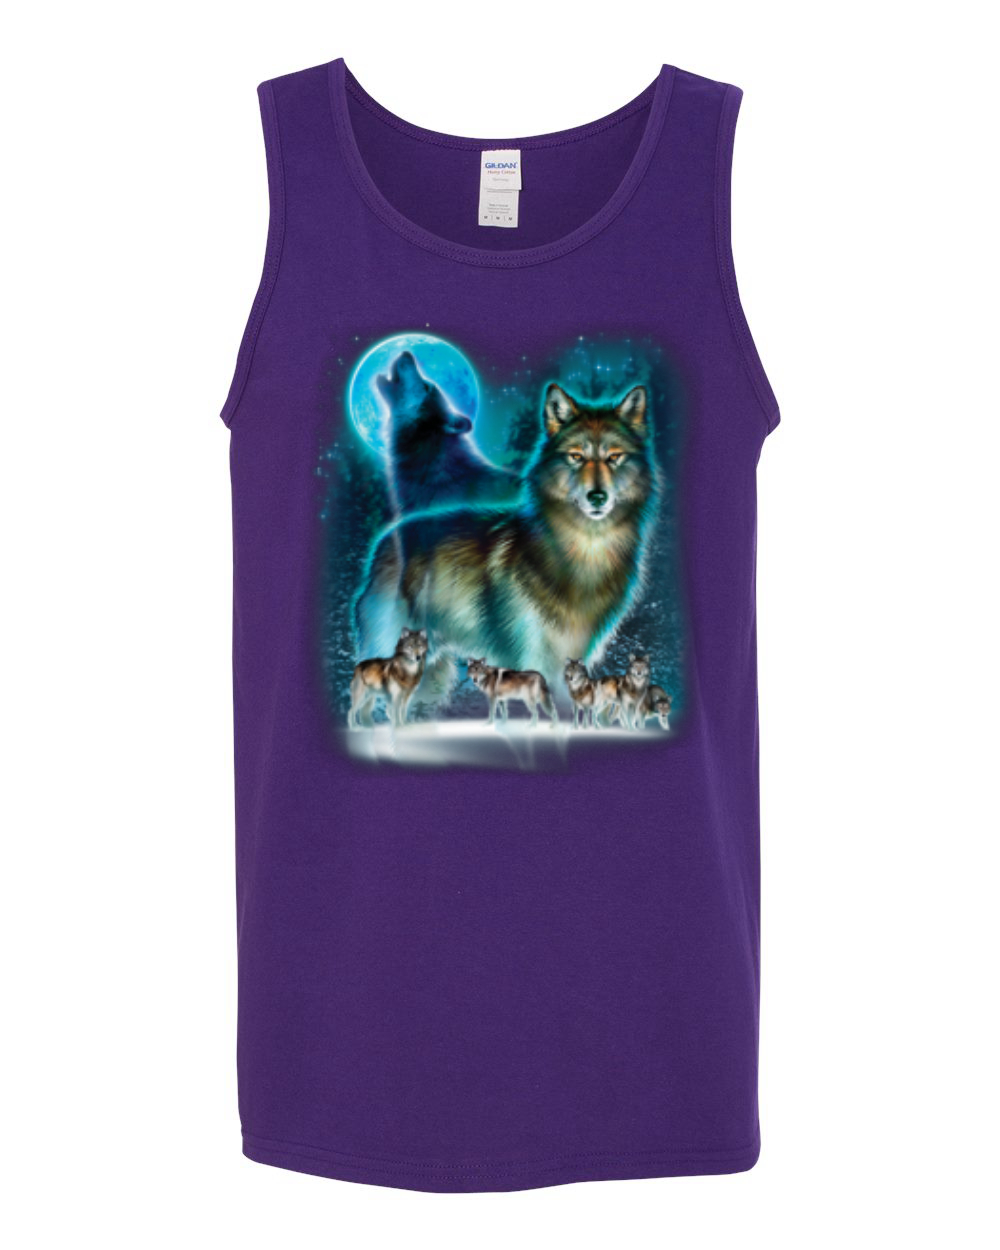 Wolf Howling At the Full Moon Wolf Pack Animal Lover Mens Graphic Tank Top, Purple, X-Large - image 2 of 3